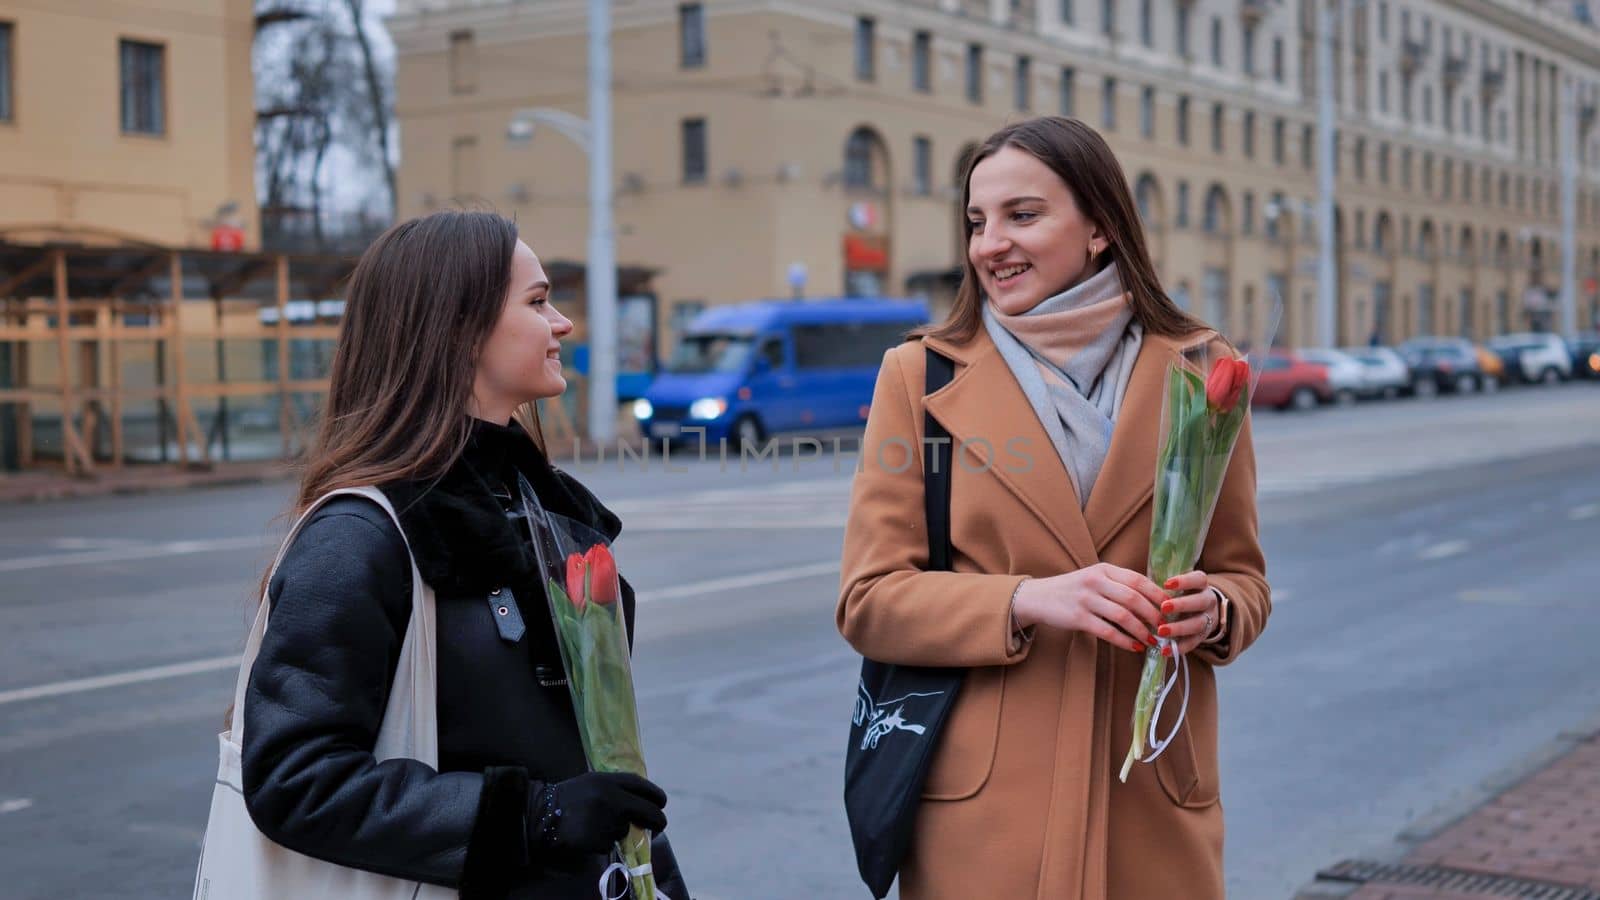 Two cheerful girlfriends say goodbye to each other on a city street